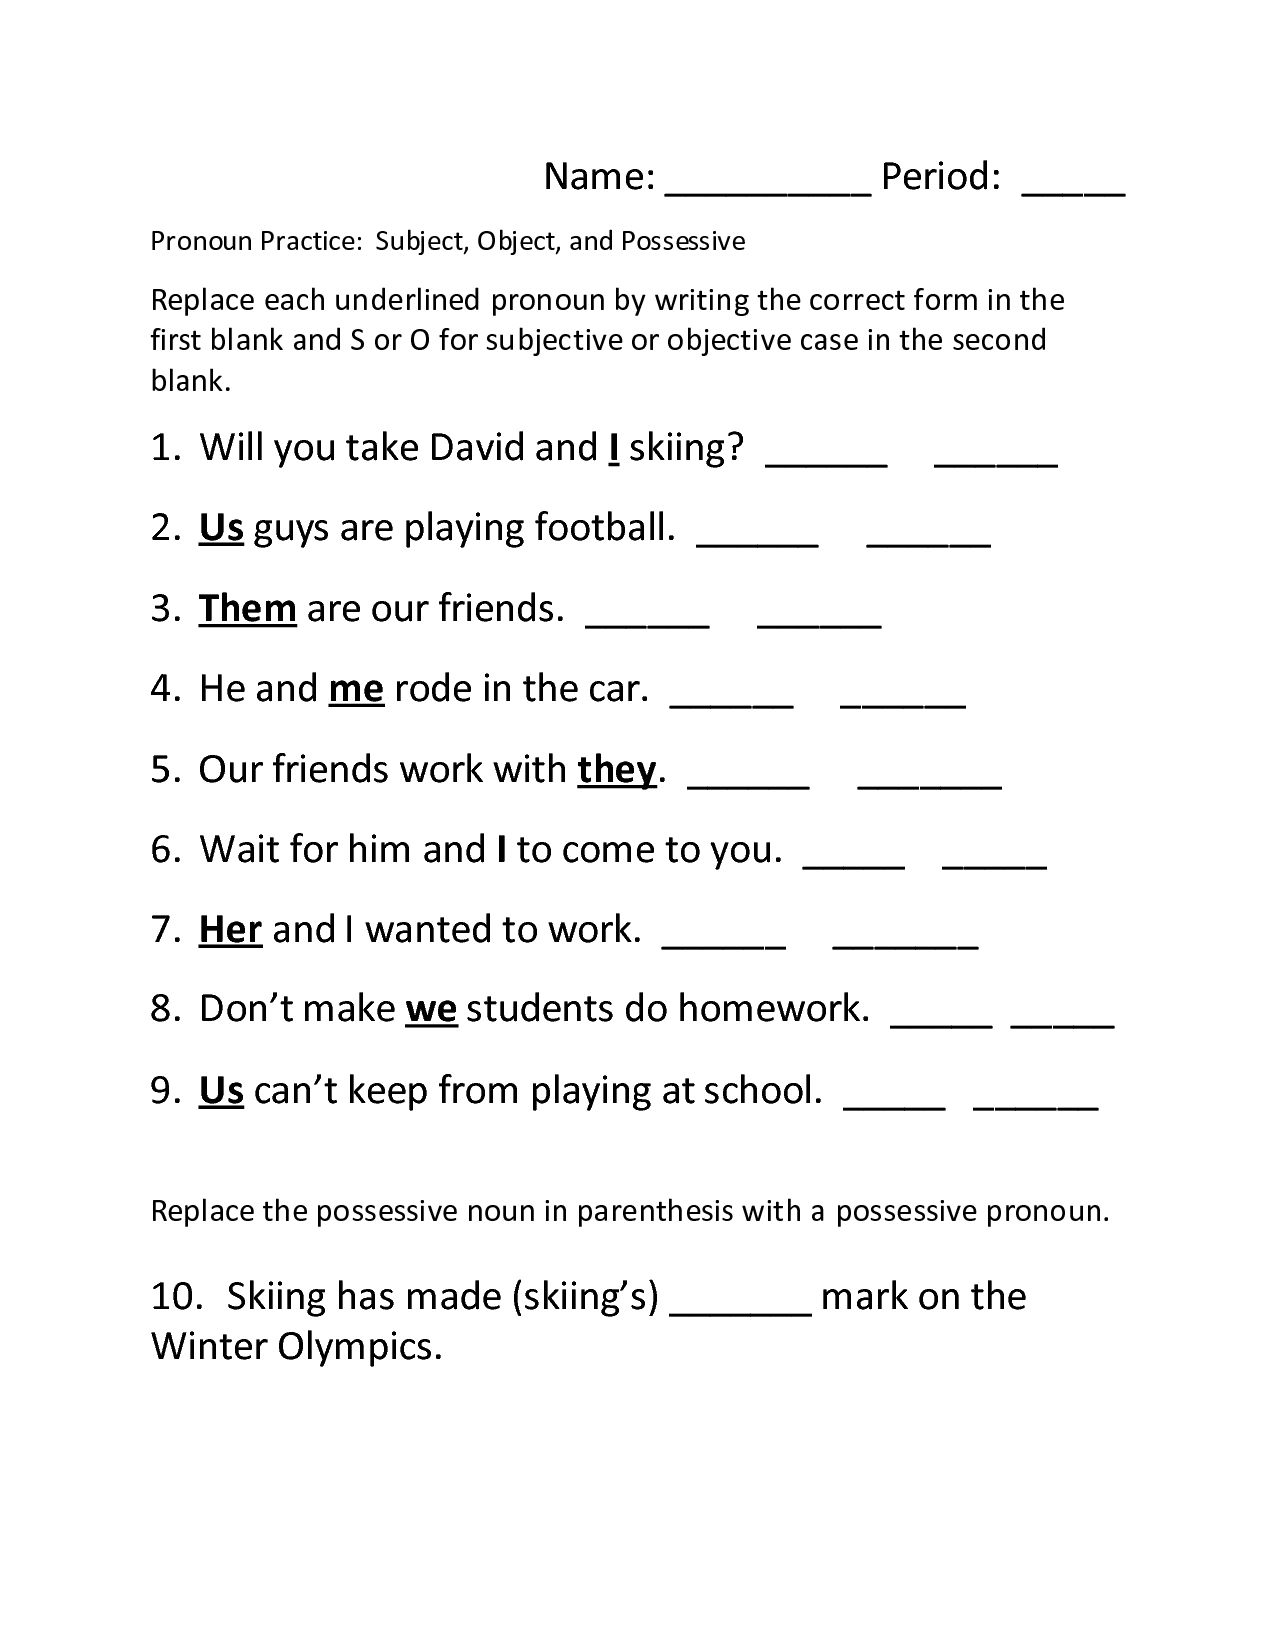 conjuguemos-verb-practice-worksheet-answers-promotiontablecovers